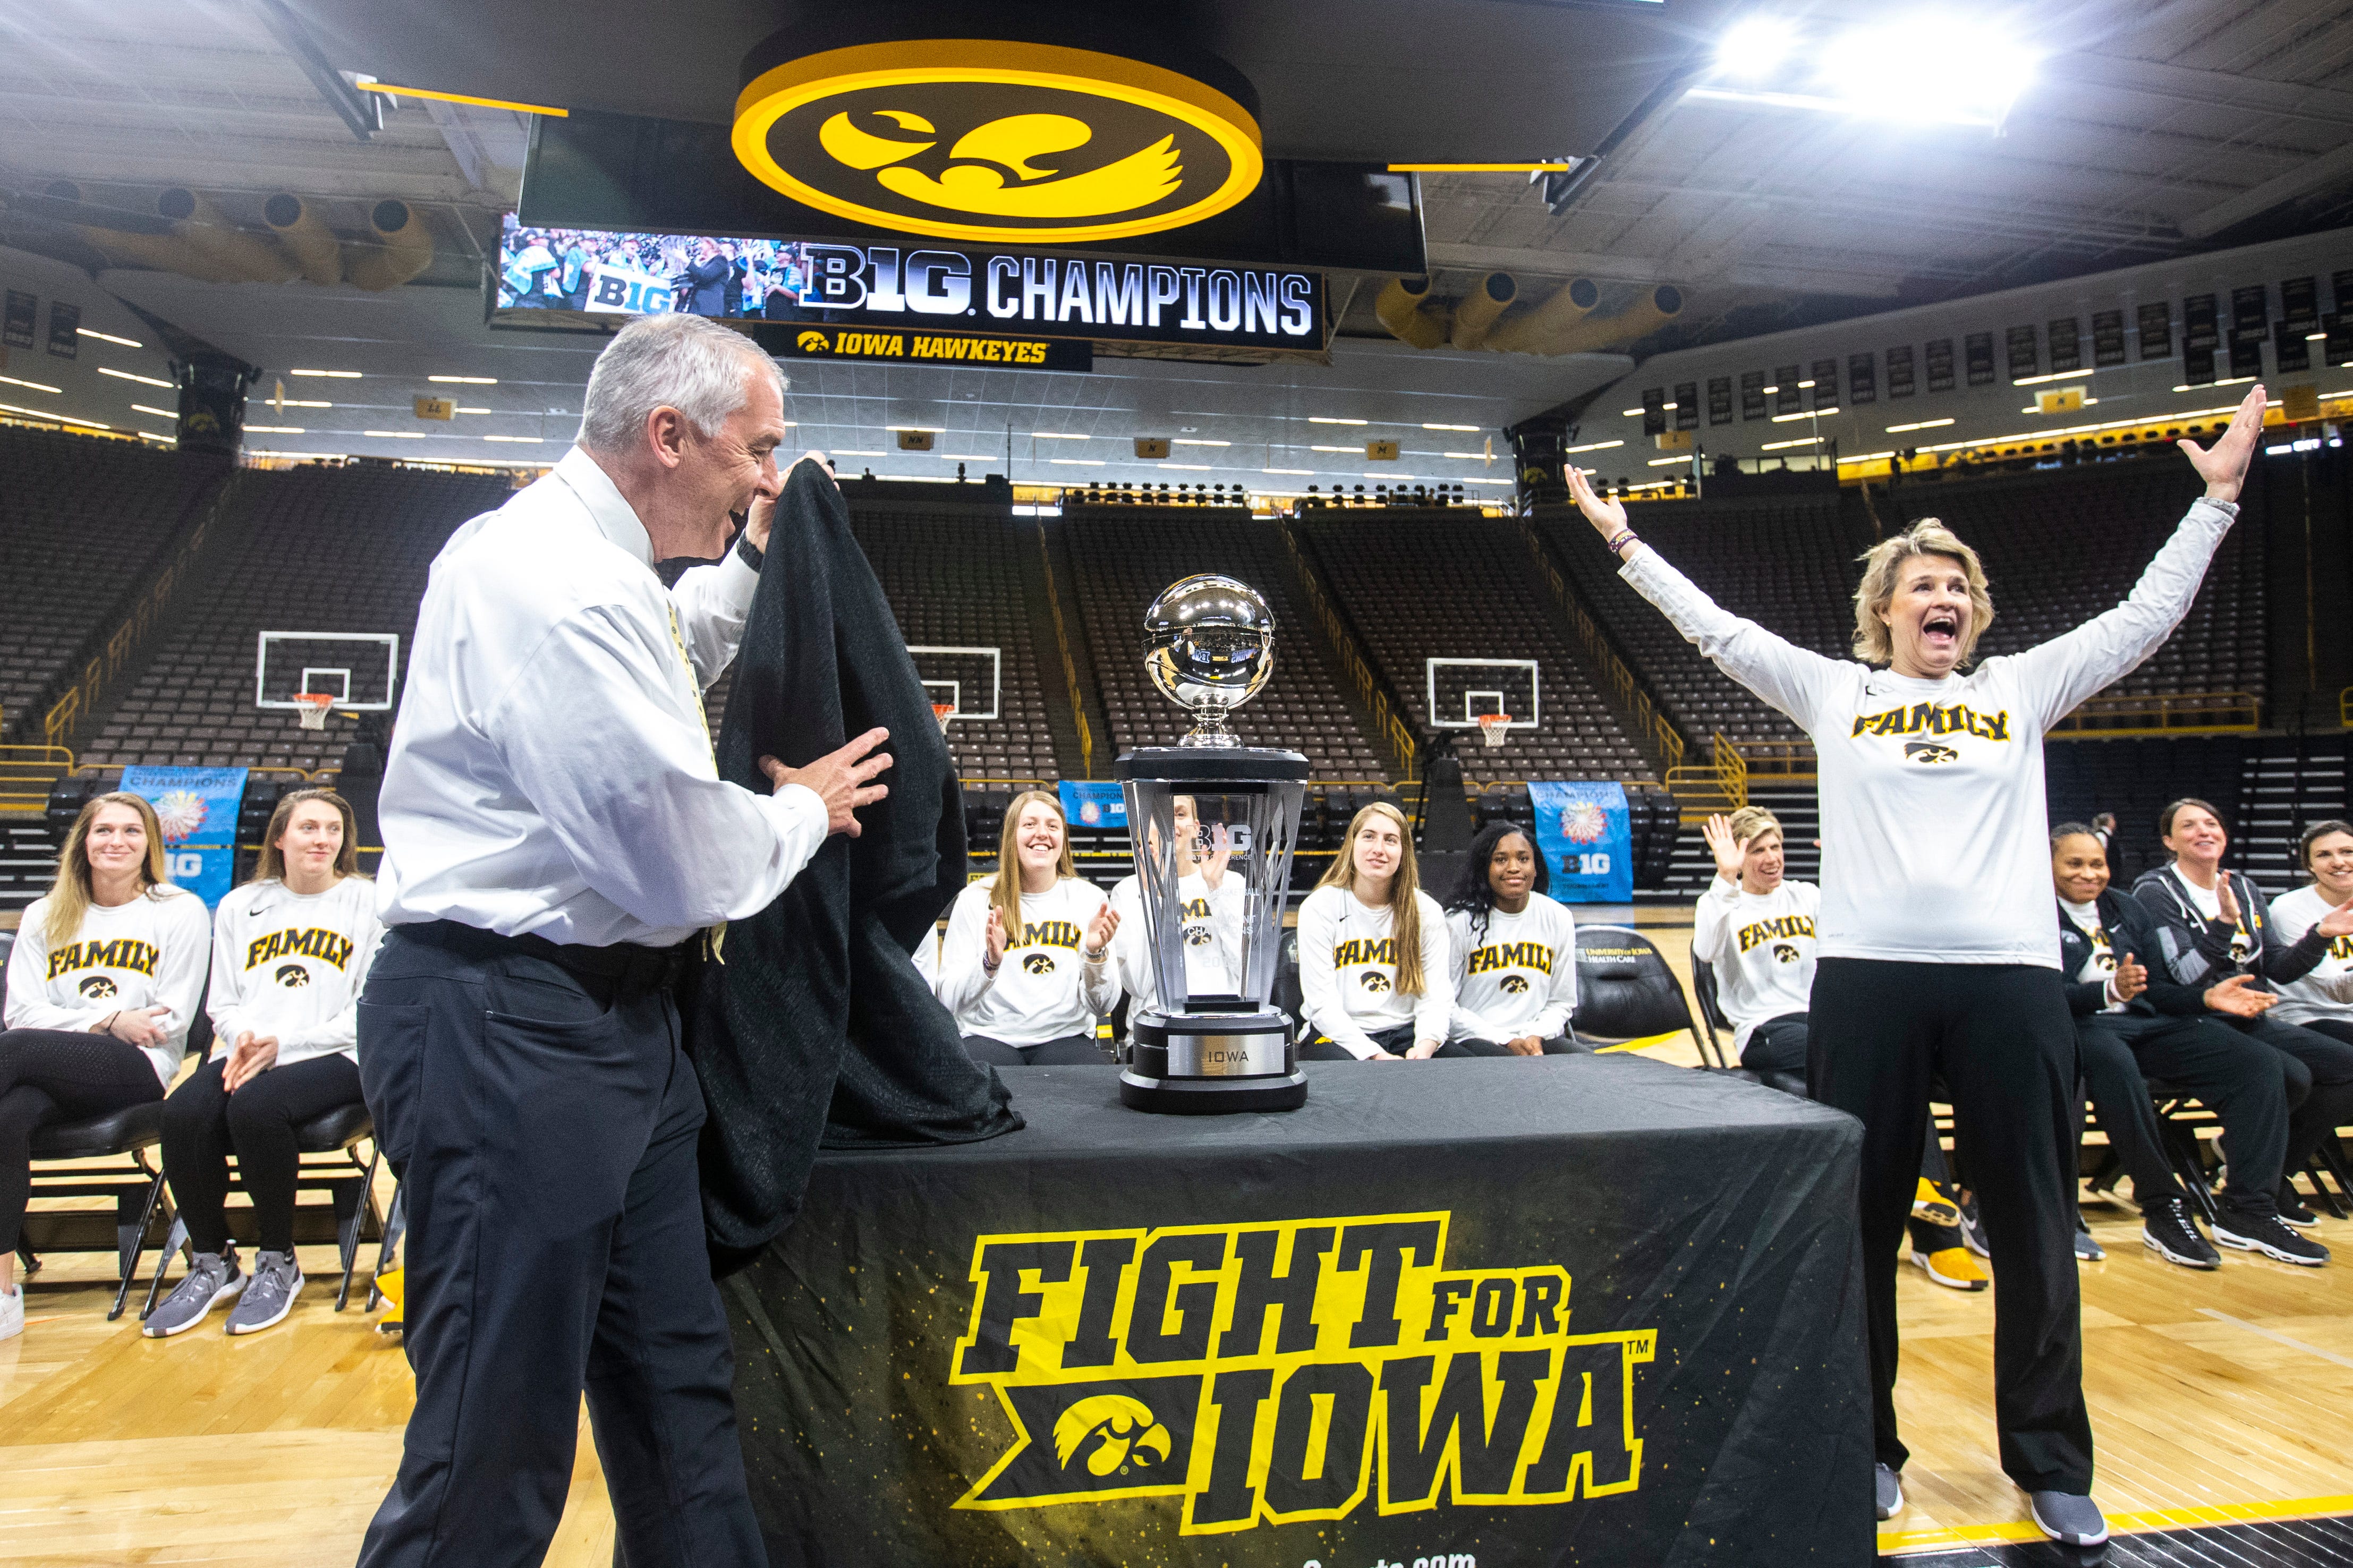 Iowa head coach Lisa Bluder, right, celebrates as Iowa athletic director Gary Barta unveils the Big Ten Tournament title during a celebration, following the NCAA selection show, on Monday, March 18, 2019, at Carver-Hawkeye Arena in Iowa City, Iowa.